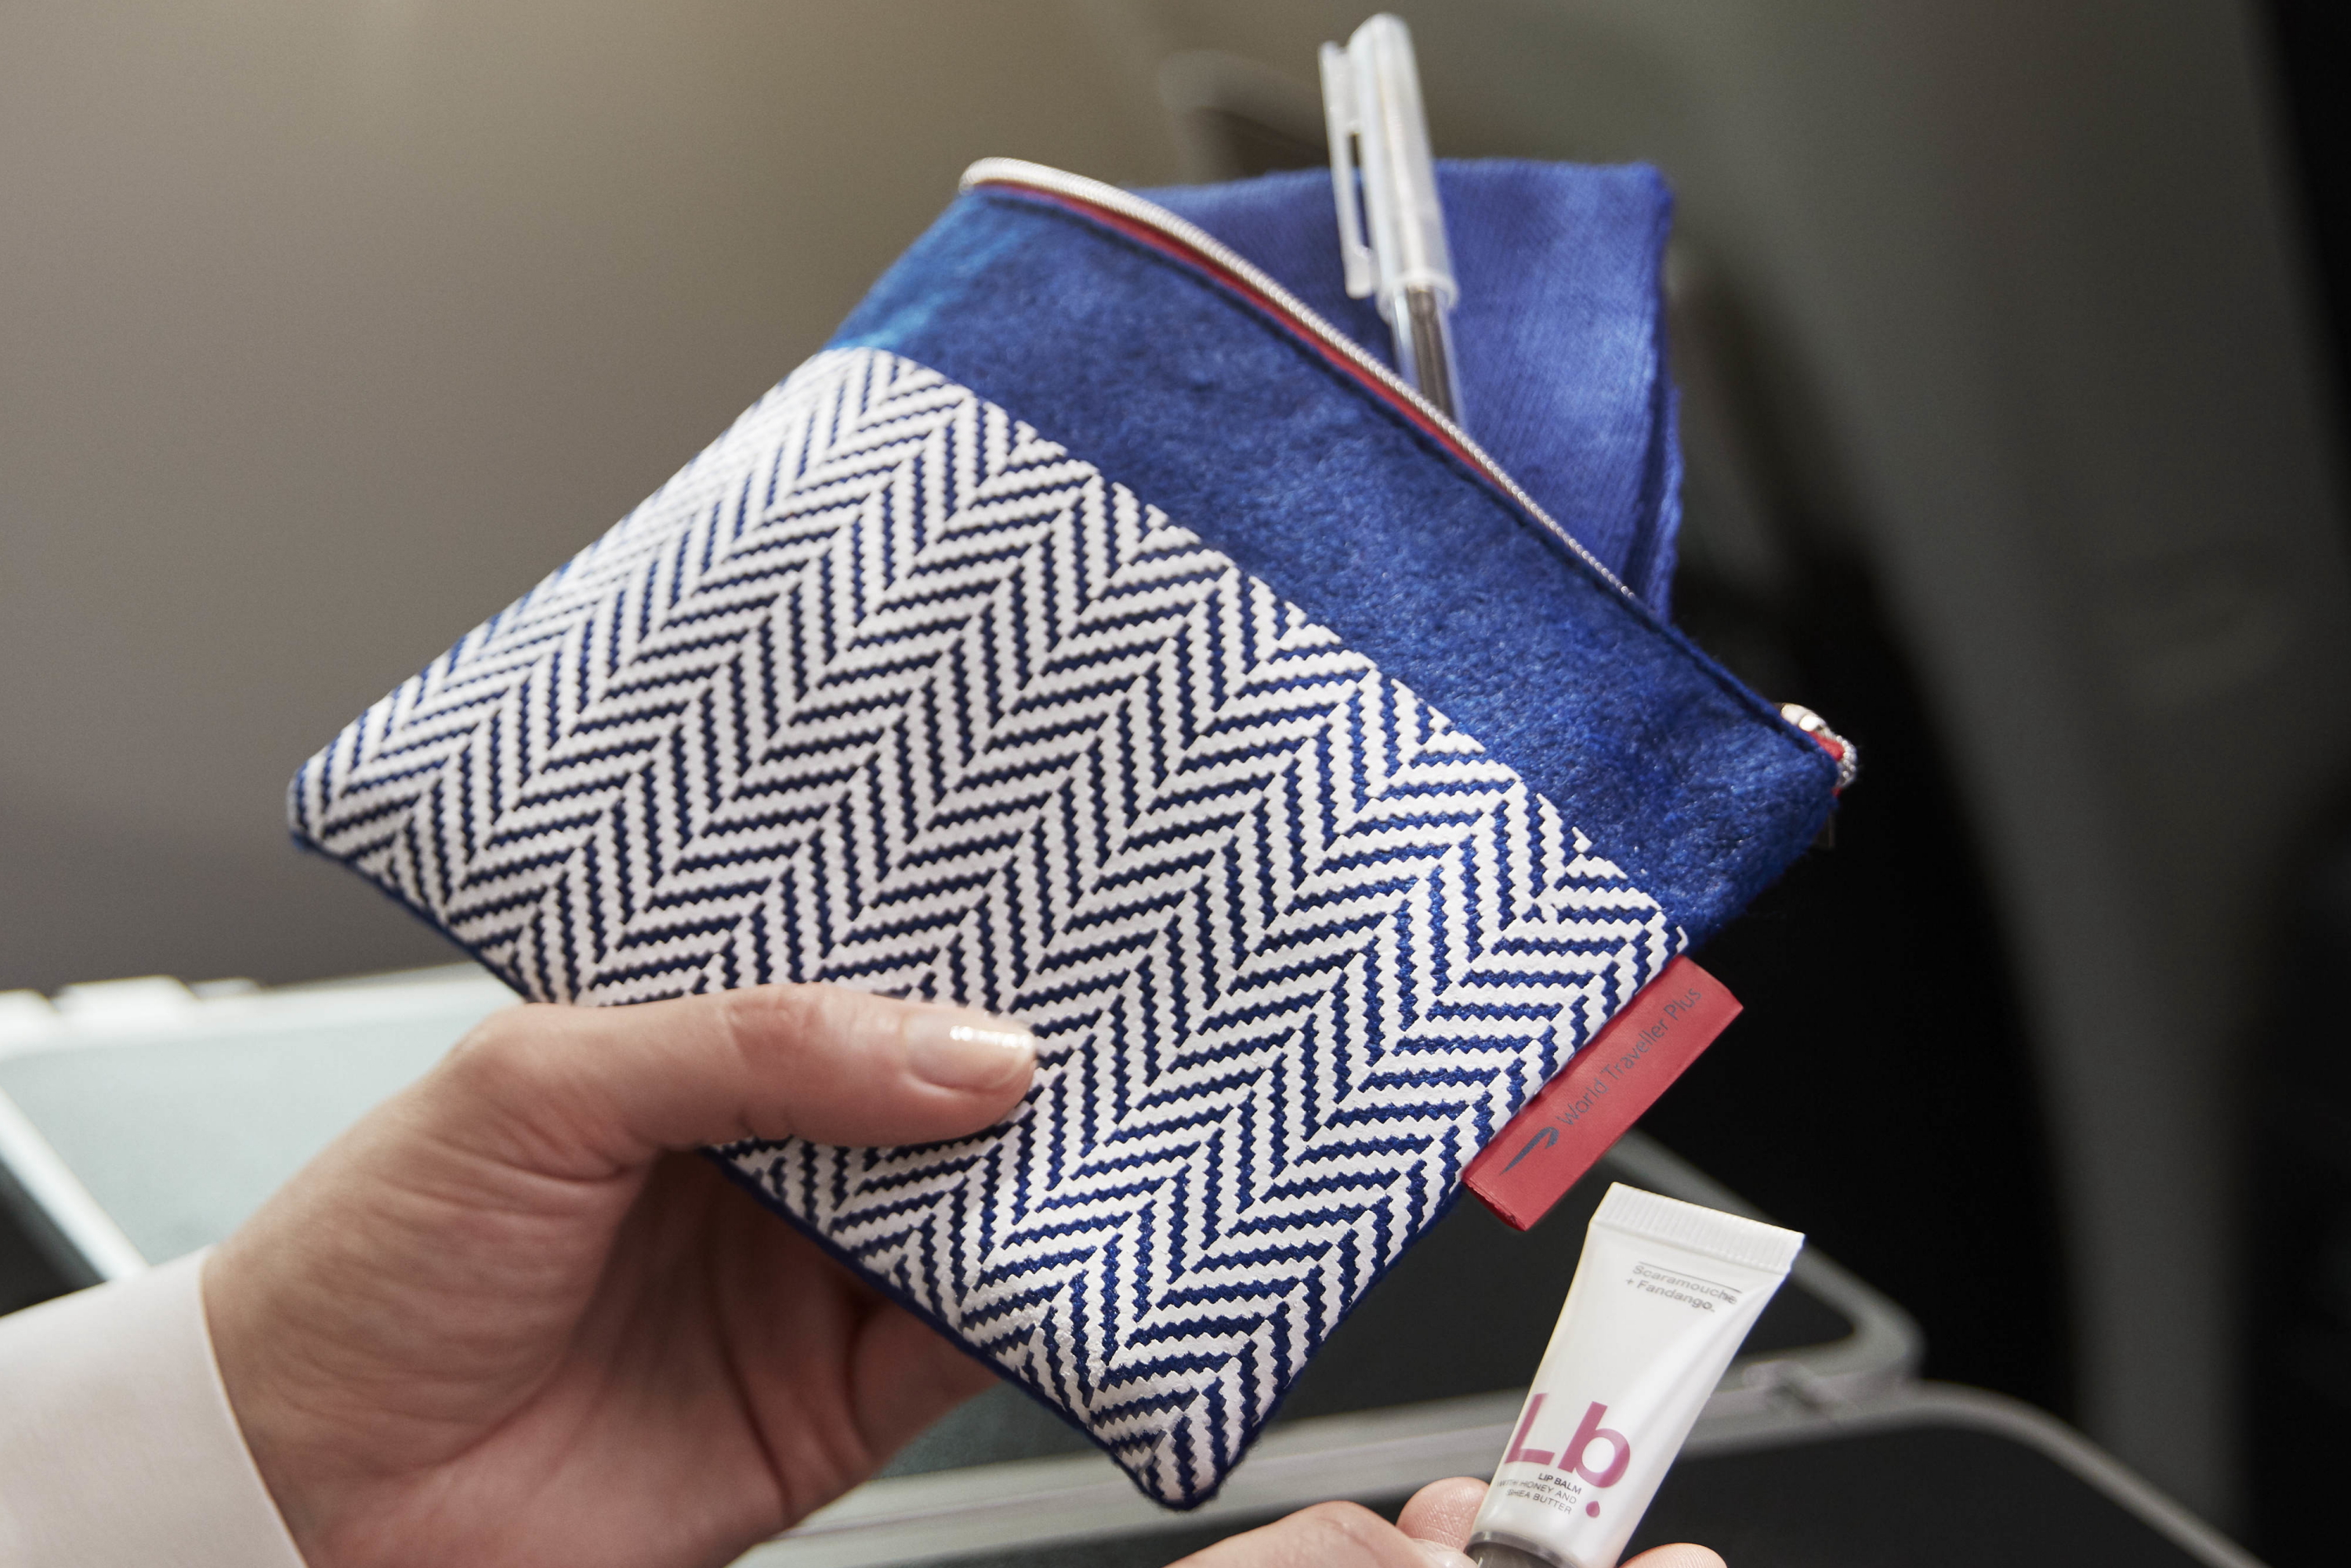 Passengers in British Airways' World Traveller Plus premium economy cabin will receive a new amenity kit from 1 July 2019. The amenity kits include an eyeshade, socks, a pen, toothbrush and toothpaste, and lip balm from the Scaramouche & Fandango range. Click to enlarge.